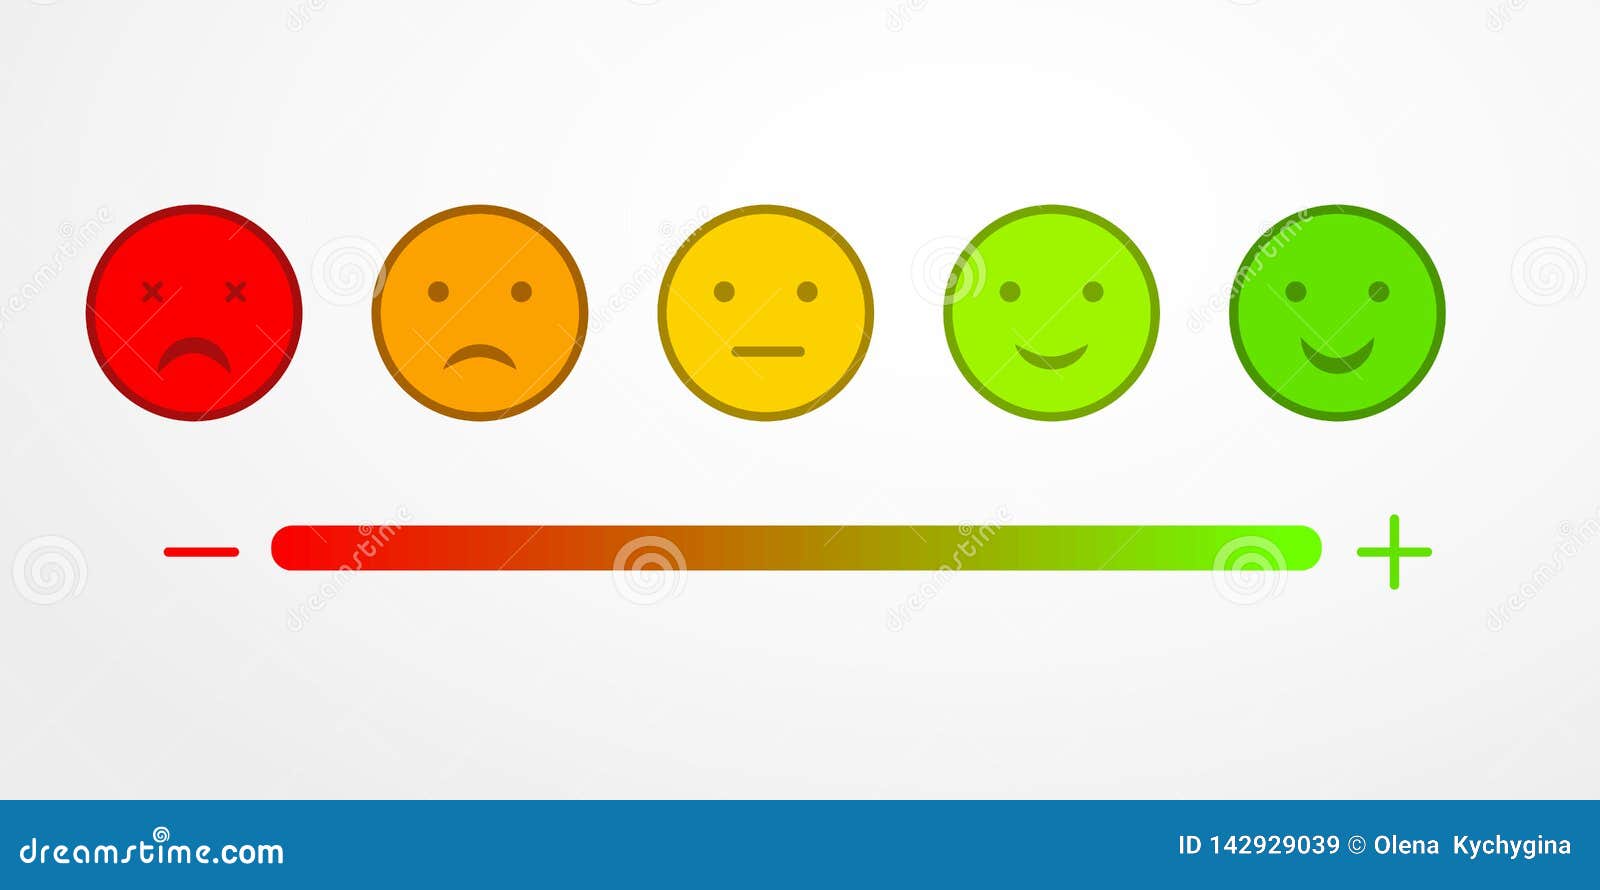 Feedback or Rating Satisfaction, Appraisal, with Smiles in Form of ...